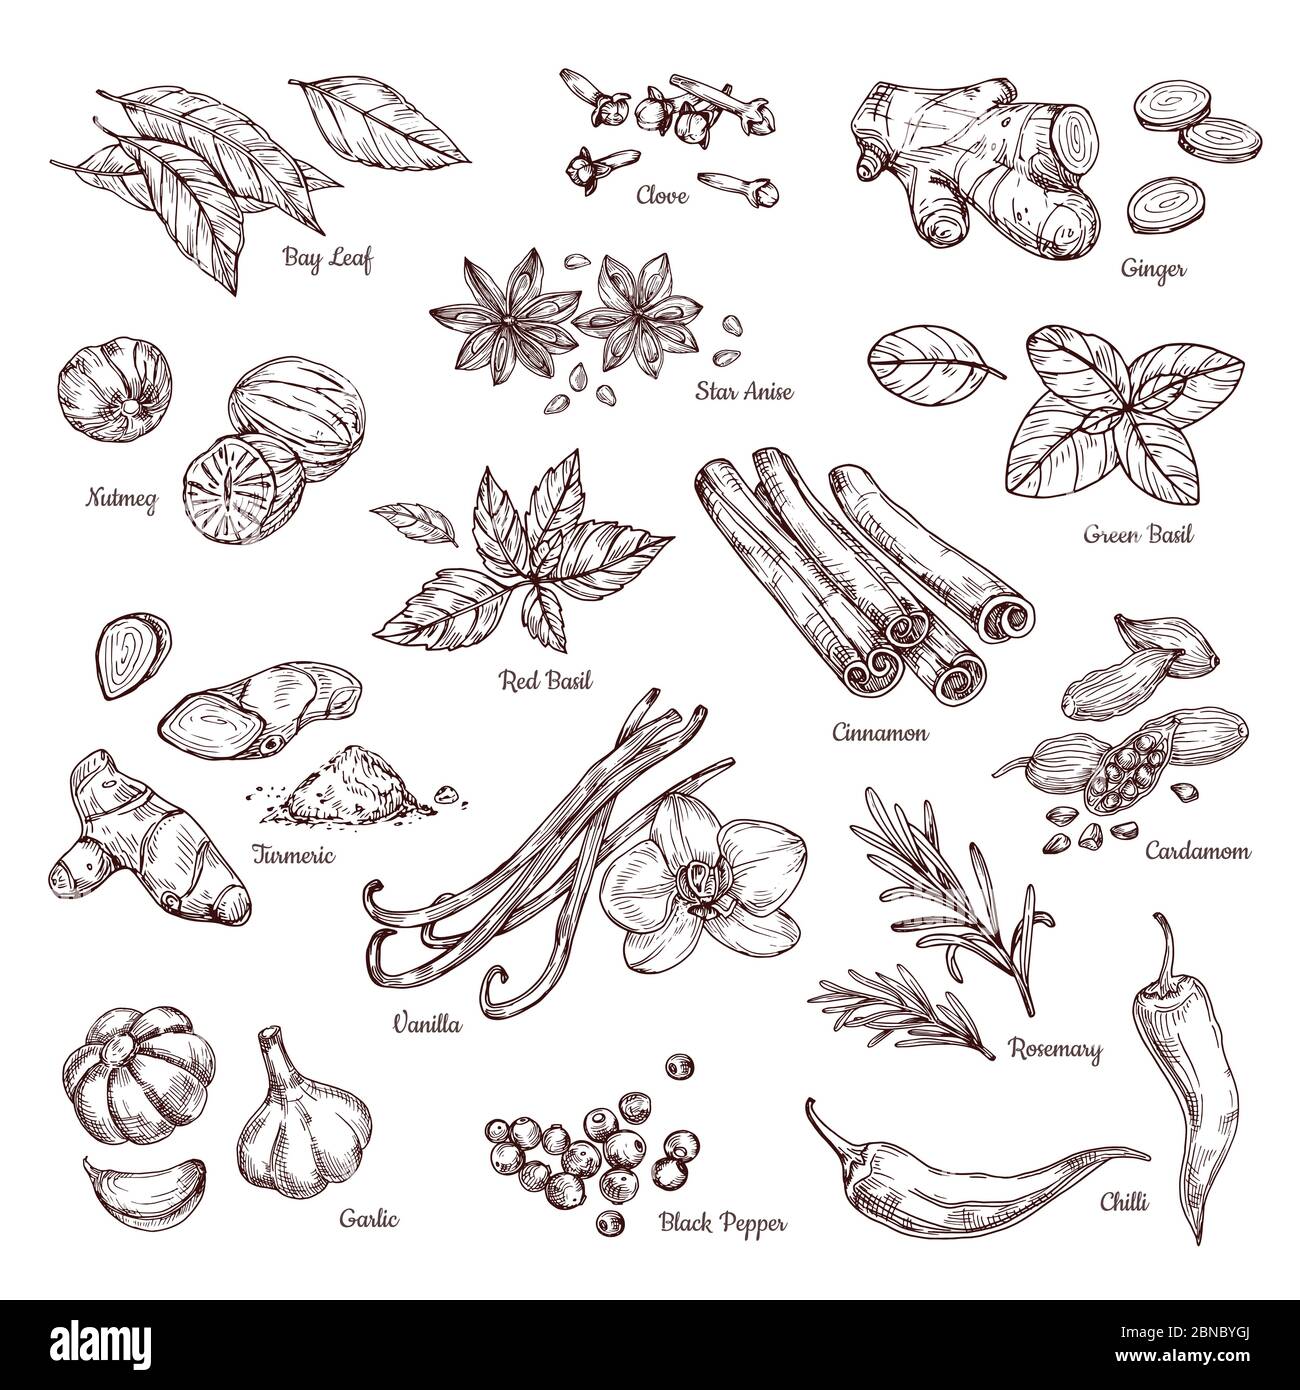 https://c8.alamy.com/comp/2BNBYGJ/hand-drawn-spices-vanilla-and-pepper-cinnamon-and-garlic-sketch-kitchen-herbs-isolated-vector-set-illustration-of-ingredient-herb-garlic-and-spice-for-cooking-2BNBYGJ.jpg